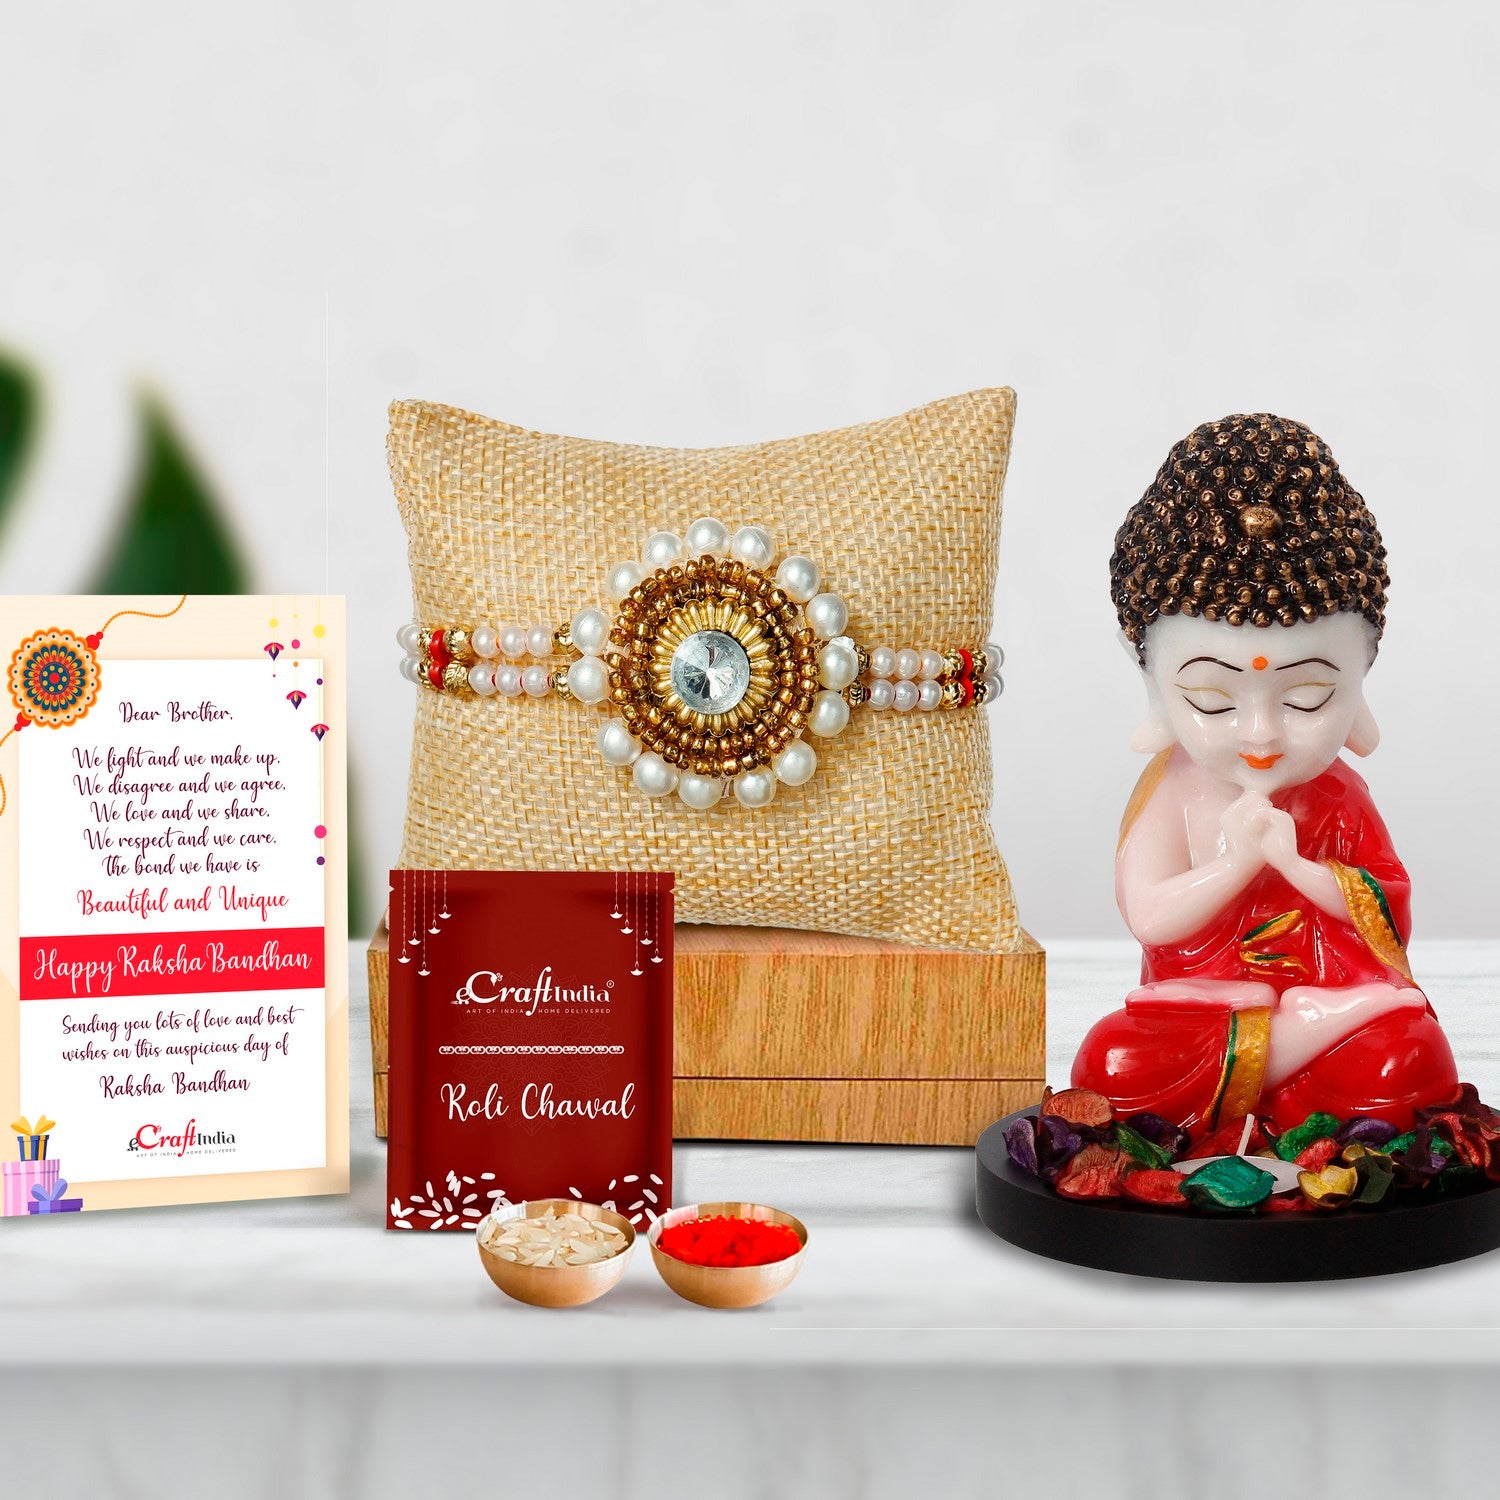 Designer Handcrafted Stone Pearl Rakhi with Praying Red Monk Buddha with Wooden Base, Fragranced Petals and Tealight and Roli Chawal Pack, Best Wishes Greeting Card